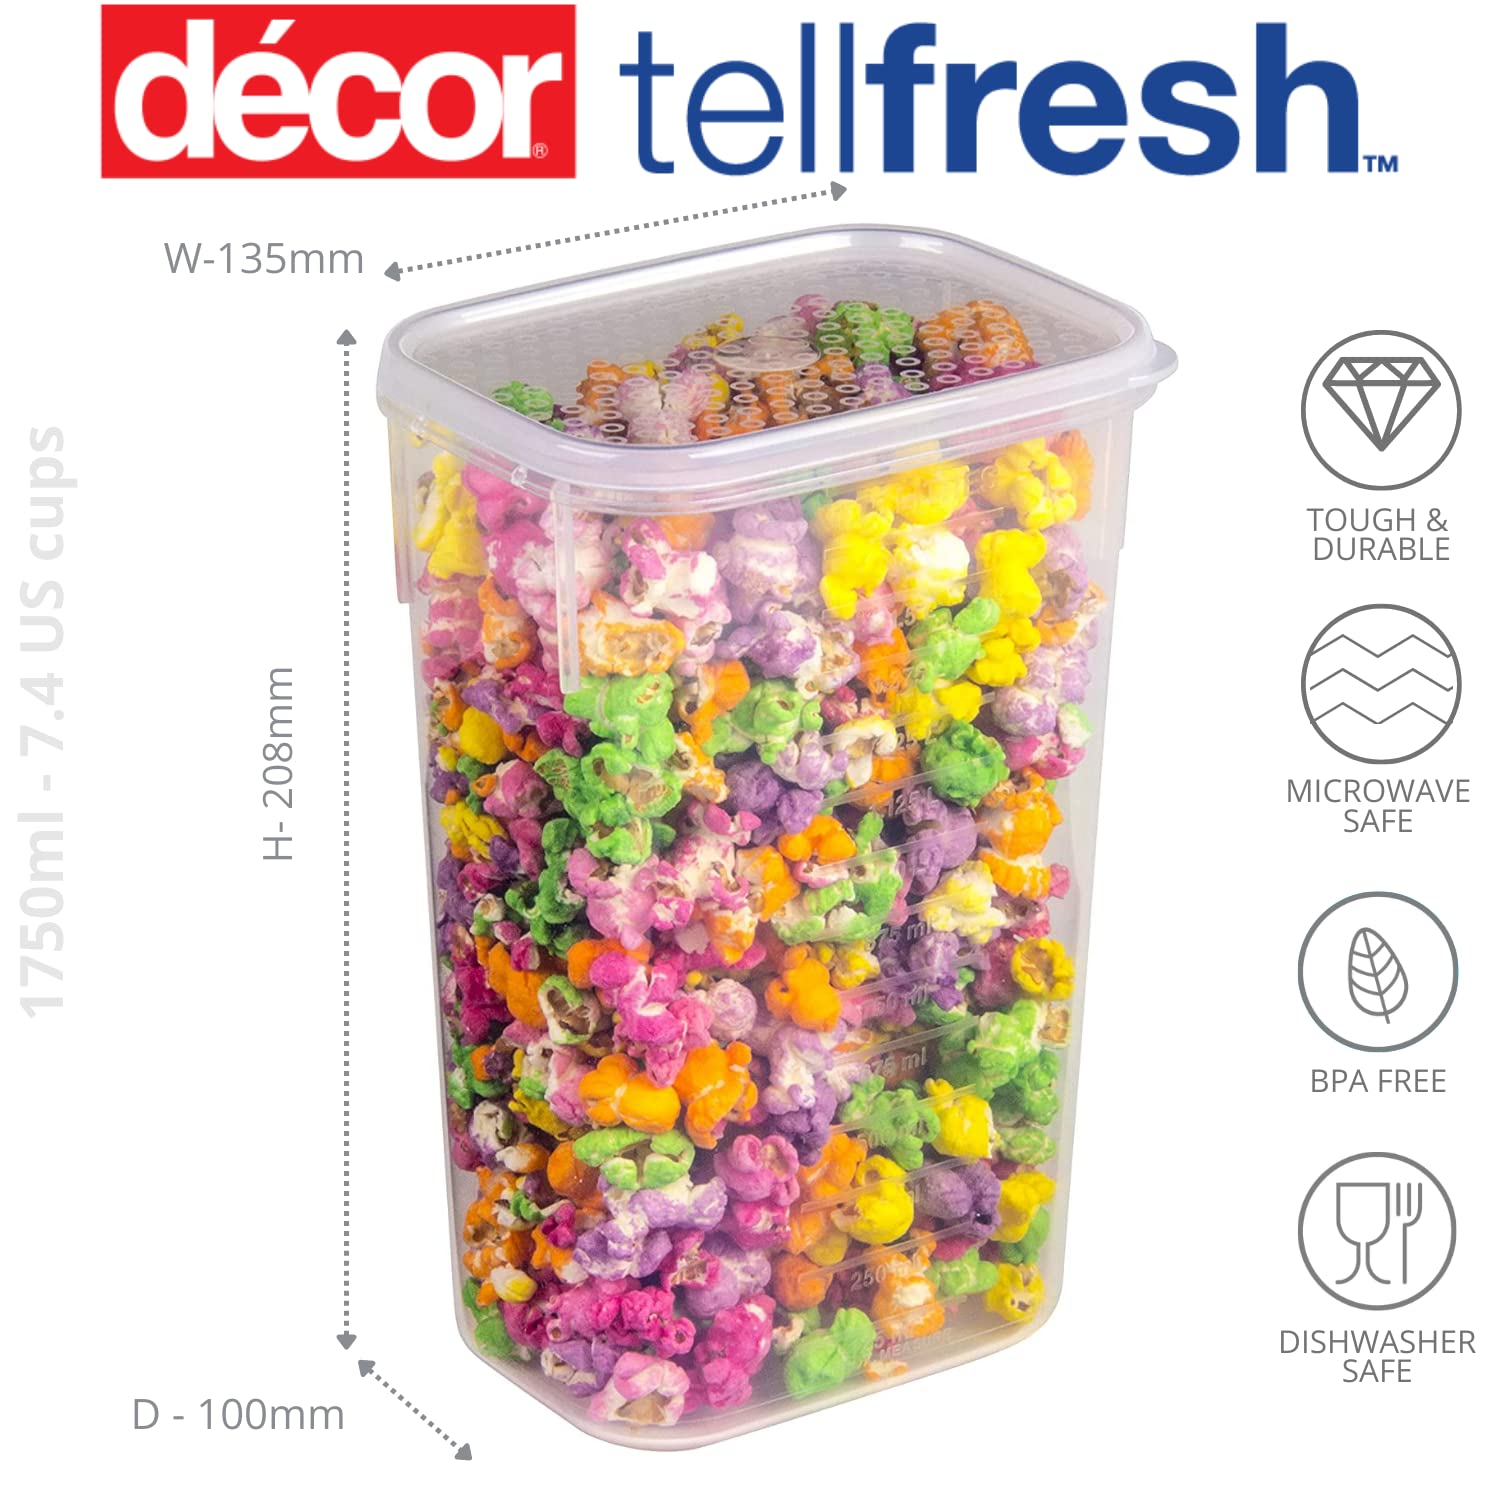 Decor Tellfresh food storage containers & measuring scoop, this stackable four storage container features a graduation scale, stackable plastic food containers